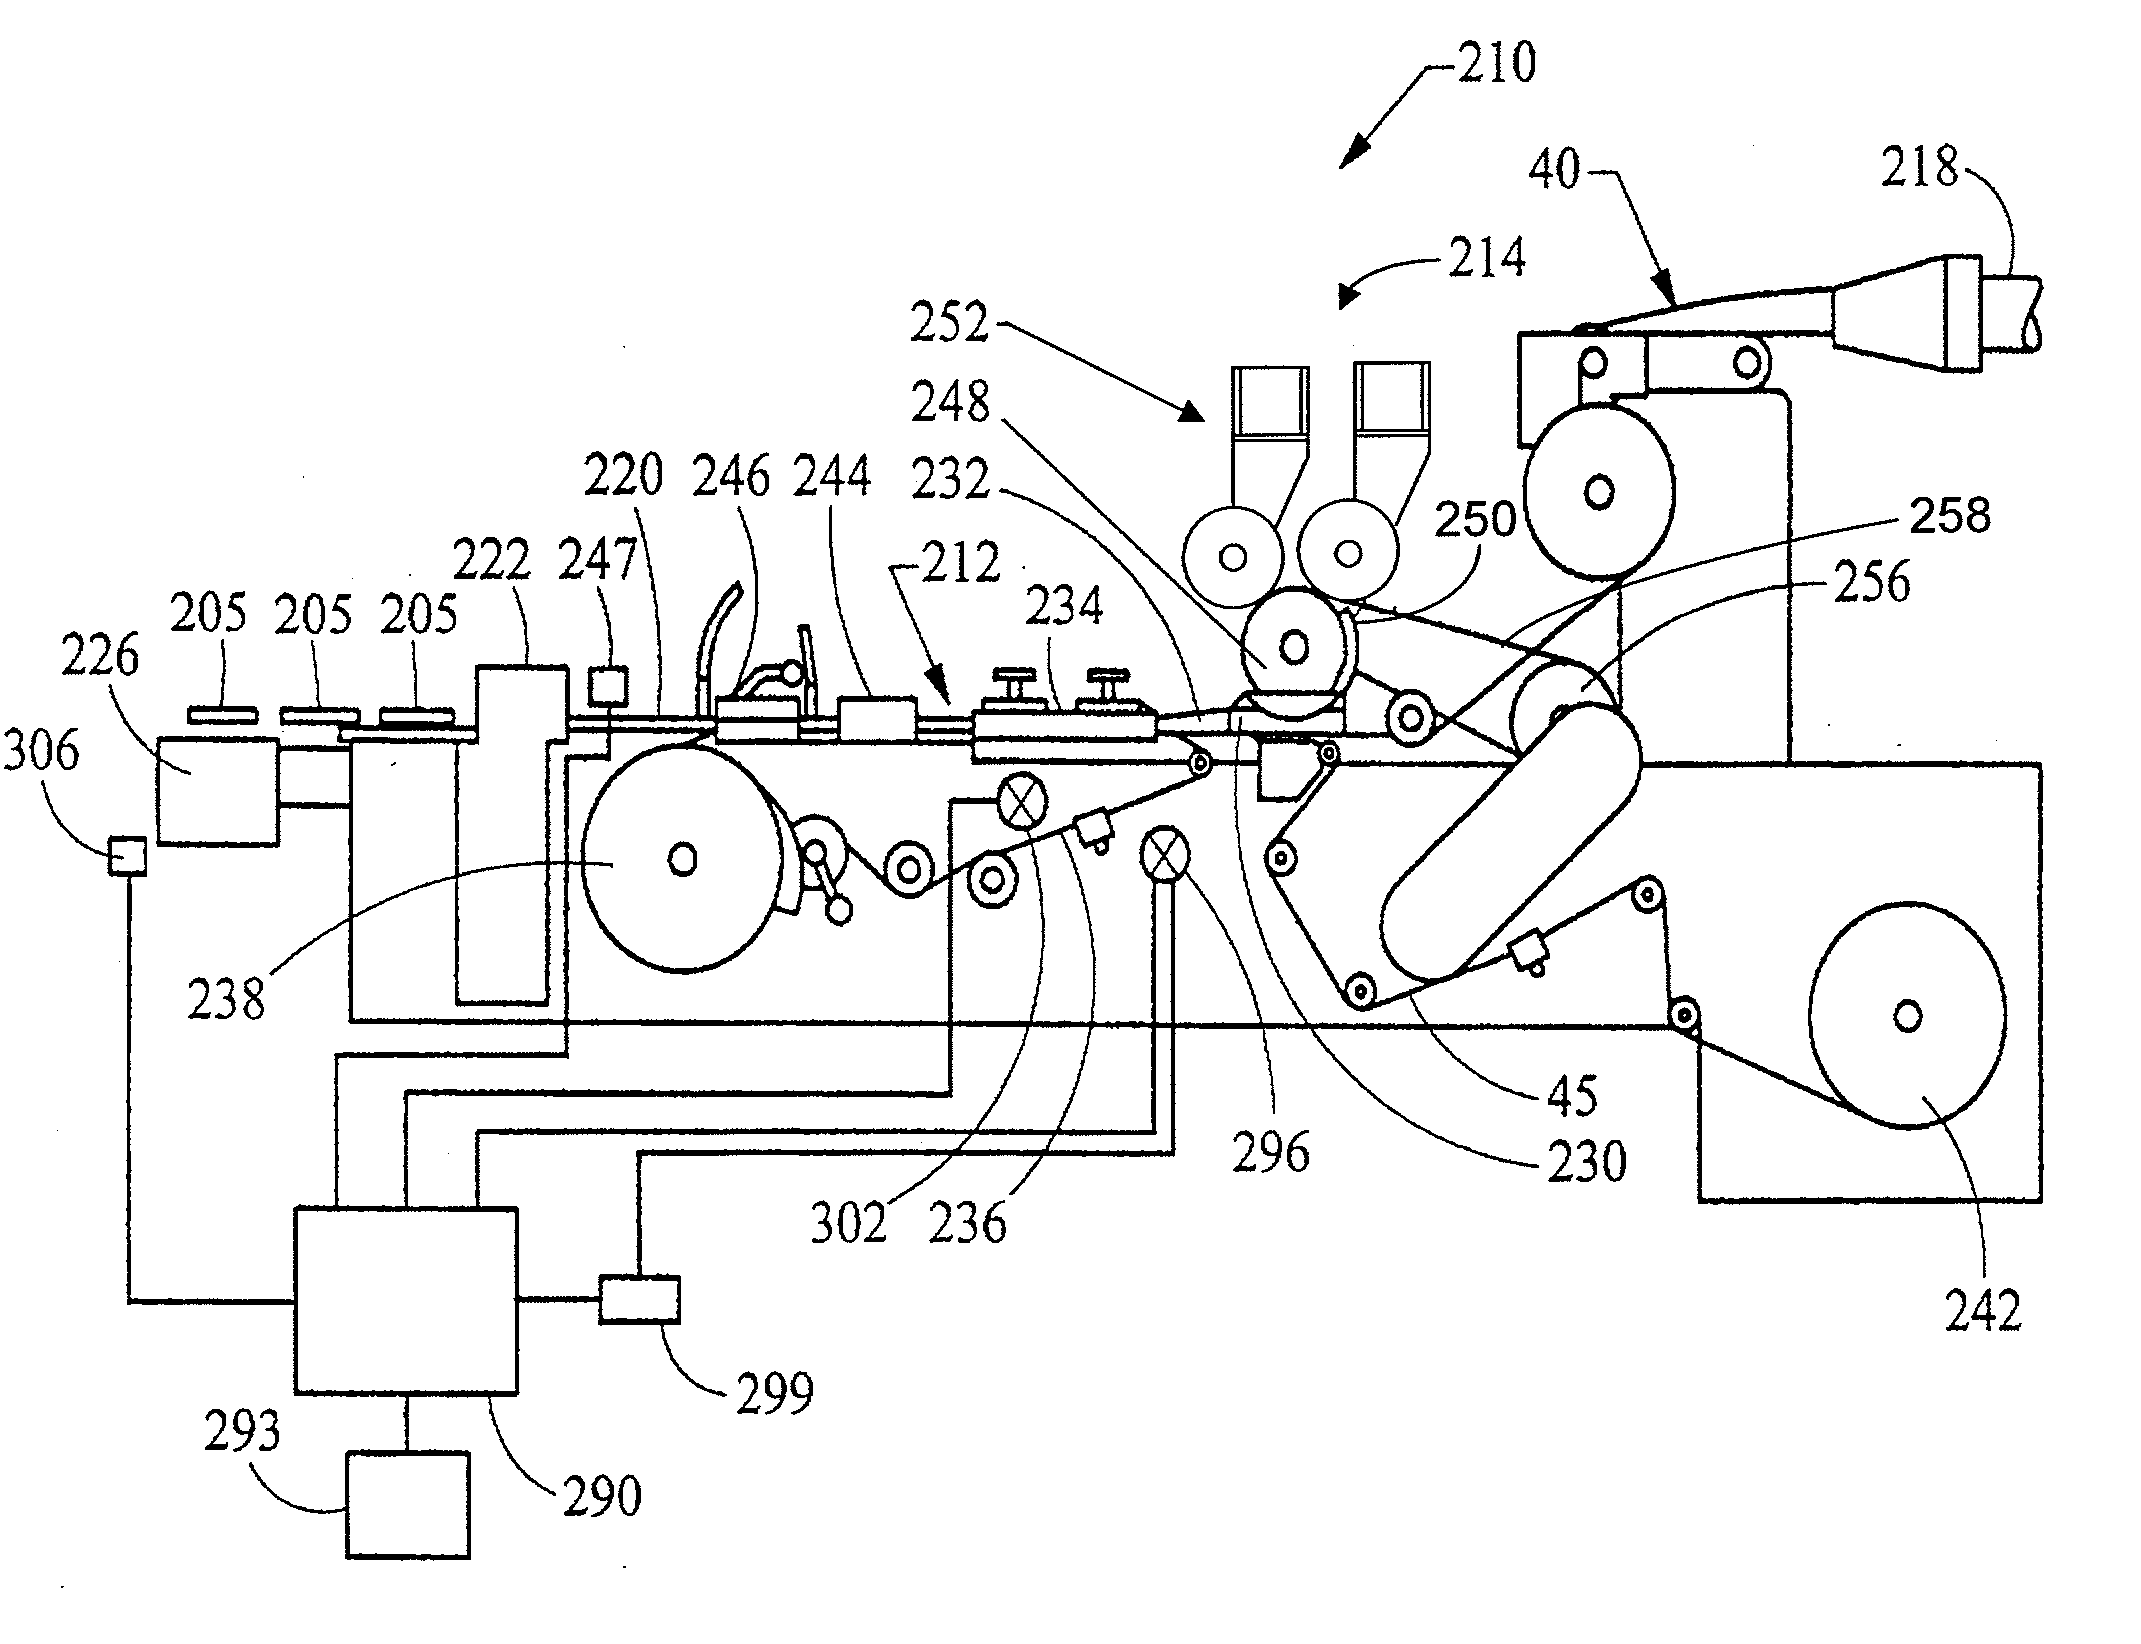 Apparatus for inserting objects into a filter component of a smoking article, and associated method